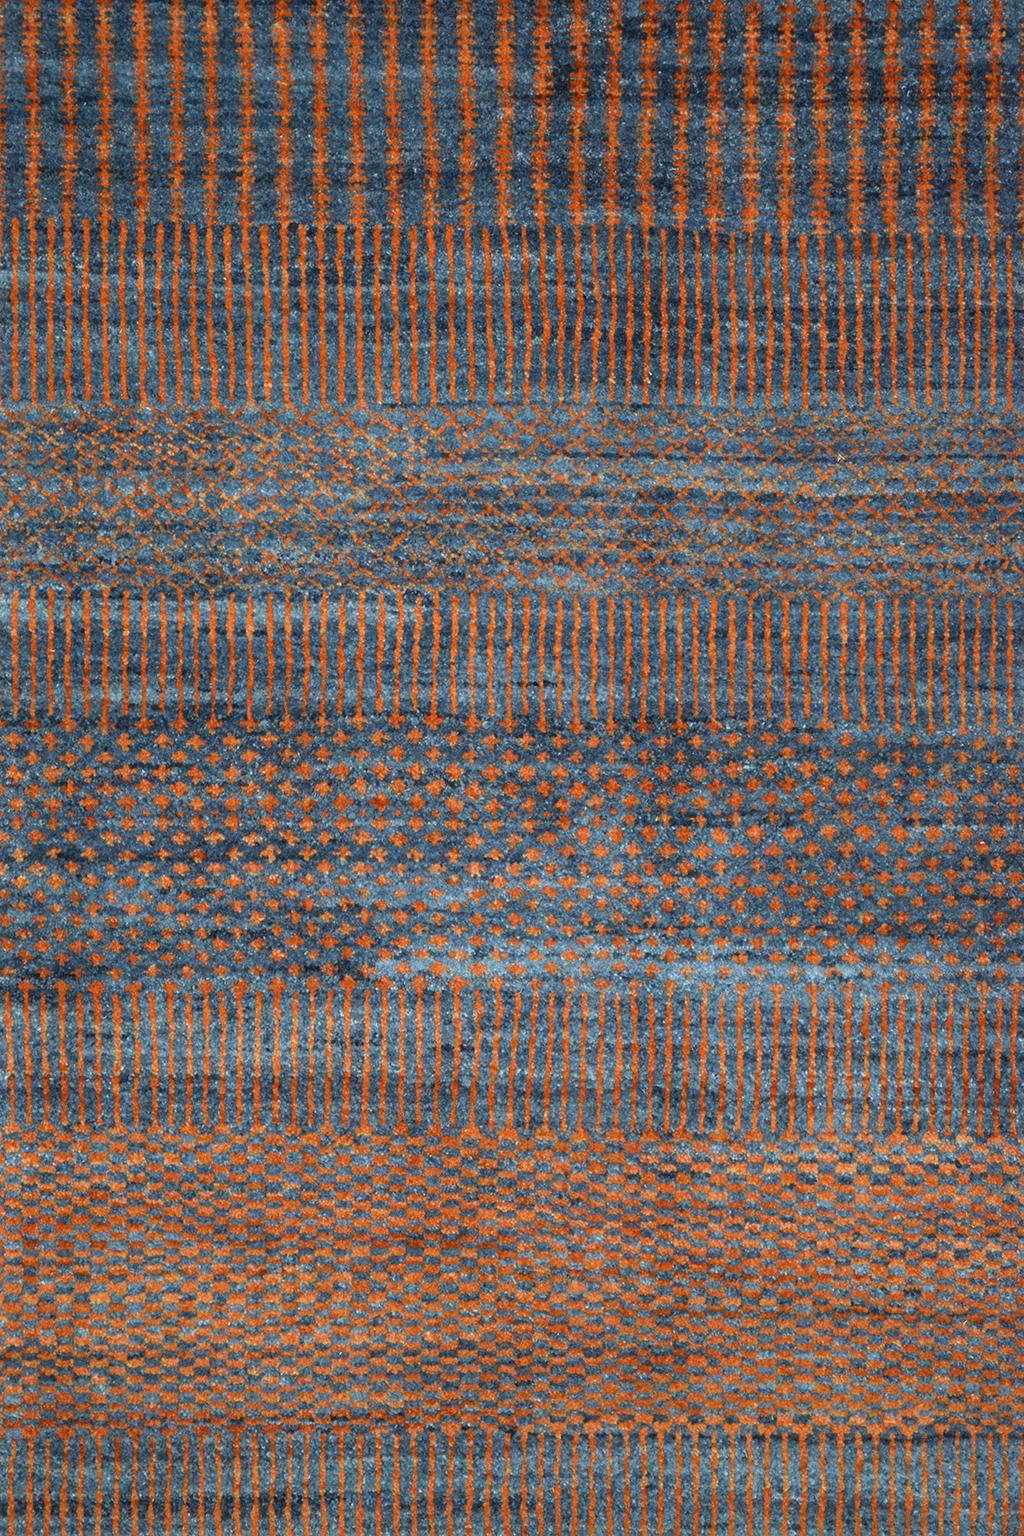 Modern Orley Shabahang Signature “Rain No. 1” Carpet in Pure Wool and Organic Dyes